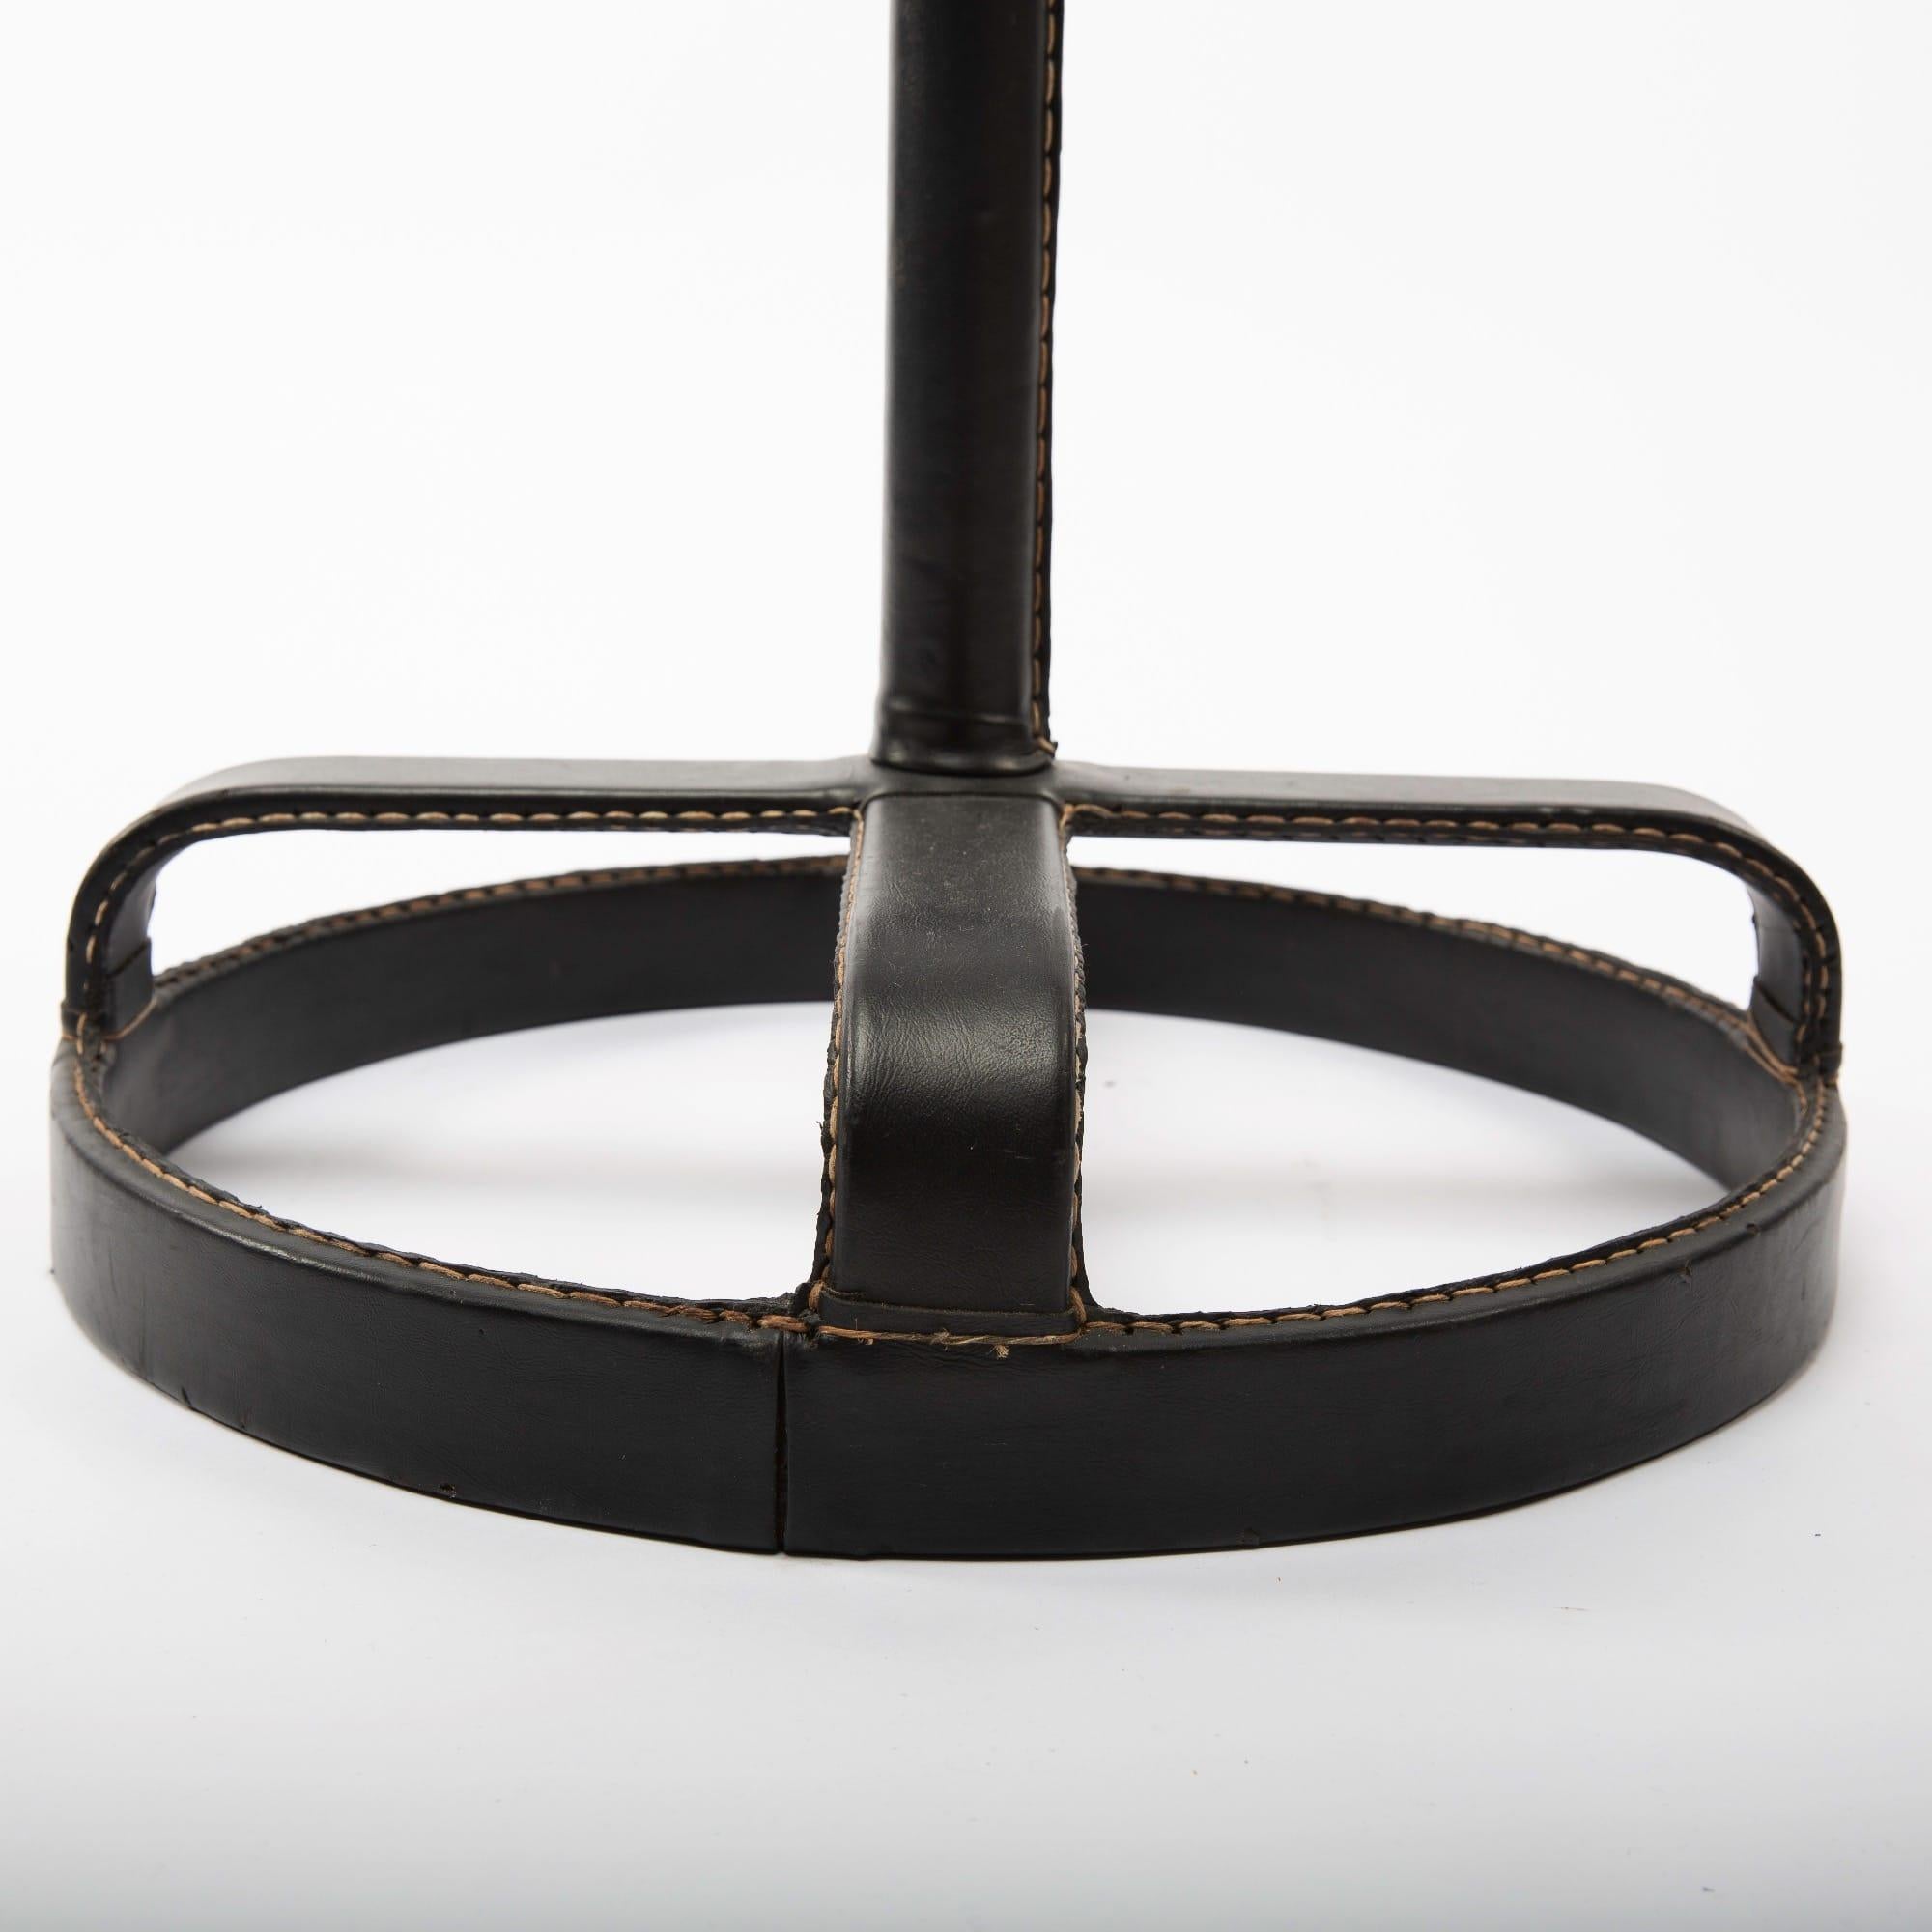 French Midcentury Coat Hanger, Jacques Adnet, Steel, Black Leather, Brass 1